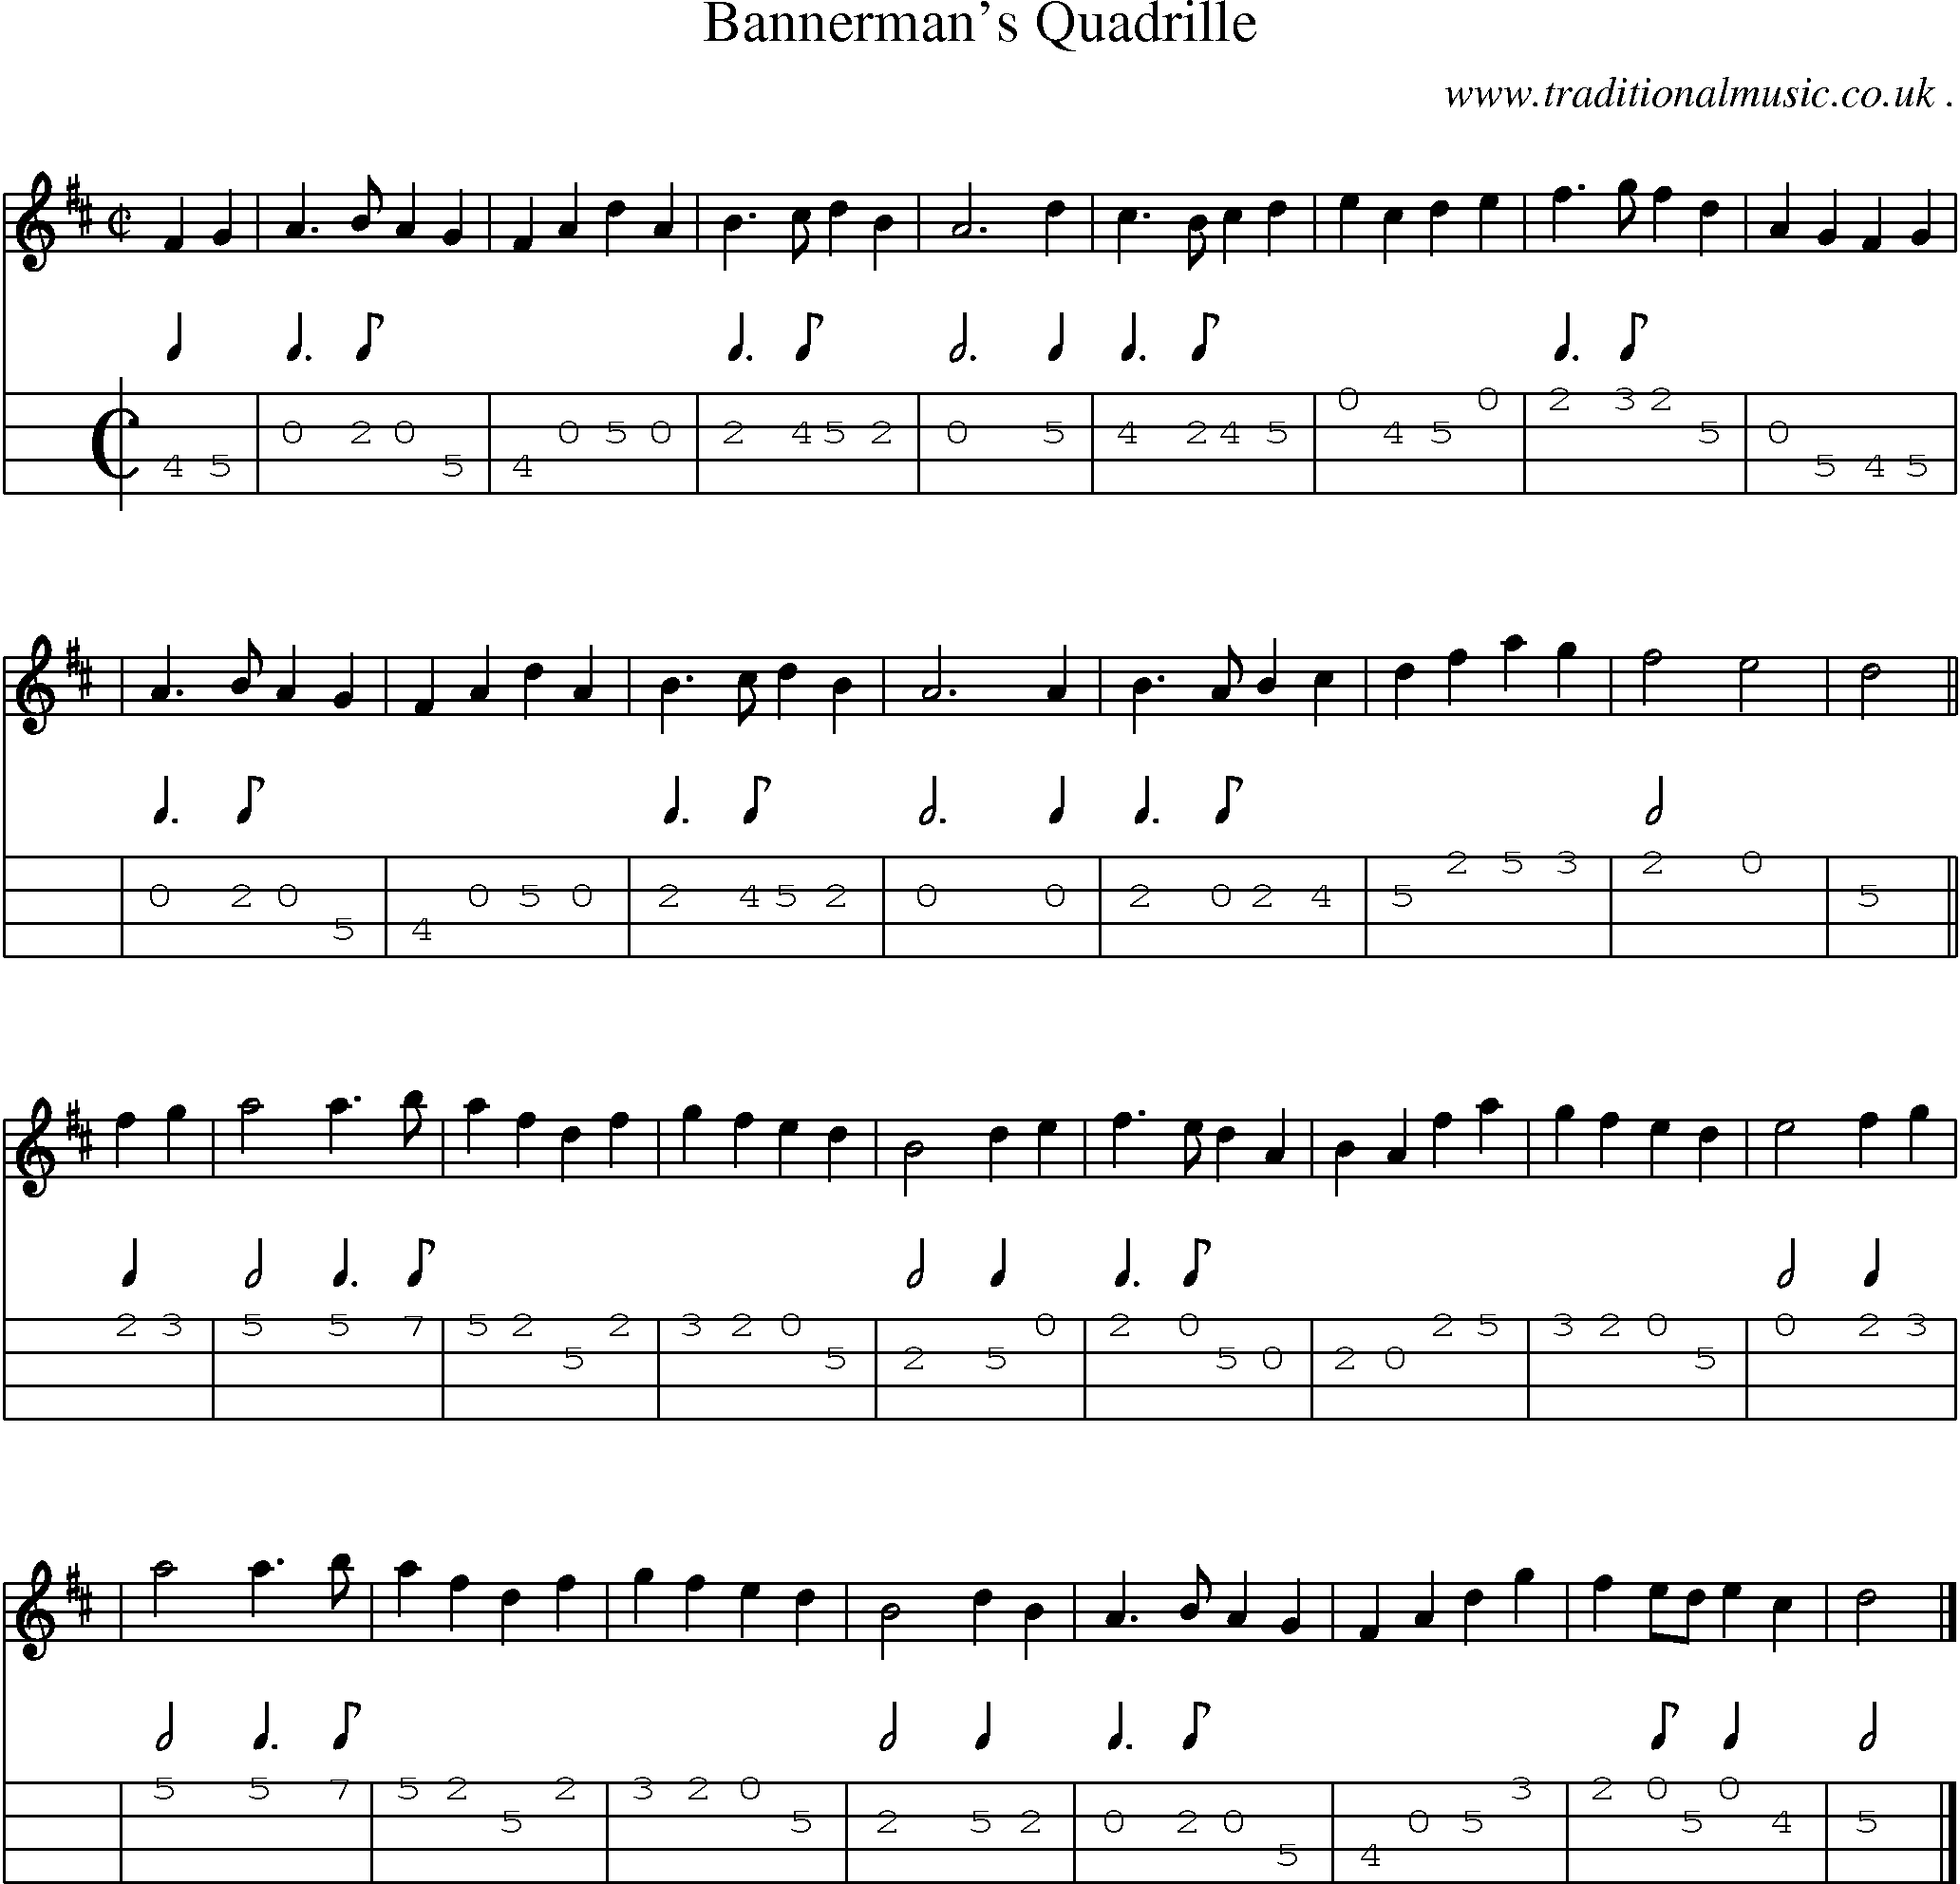 Sheet-music  score, Chords and Mandolin Tabs for Bannermans Quadrille